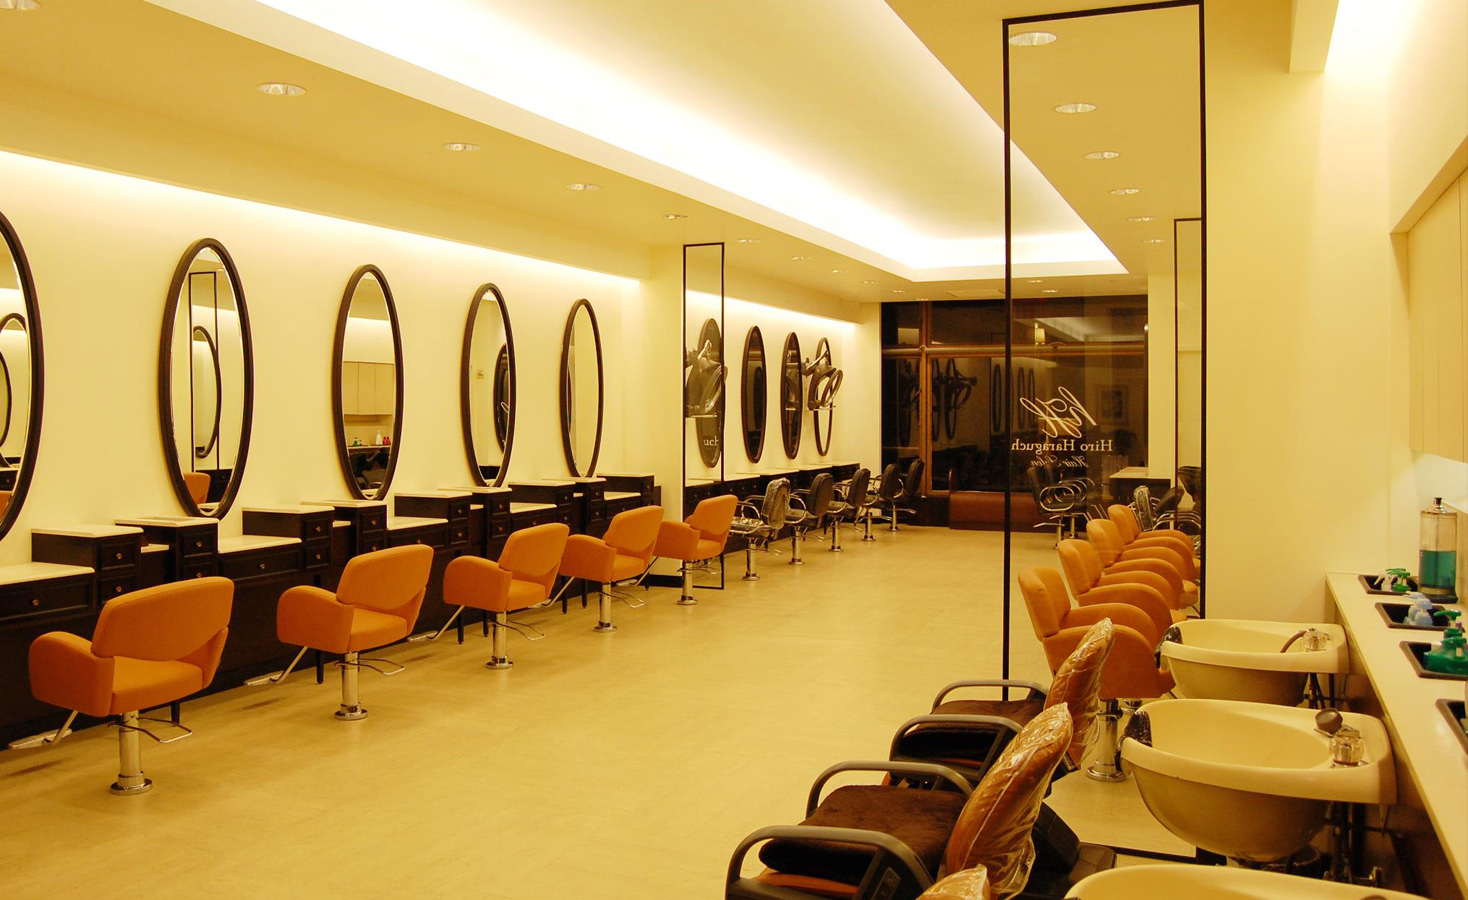 The art of grooming, The art of styling, Different styles for men, Learn grooming, Grooming styles,haraguchi salon